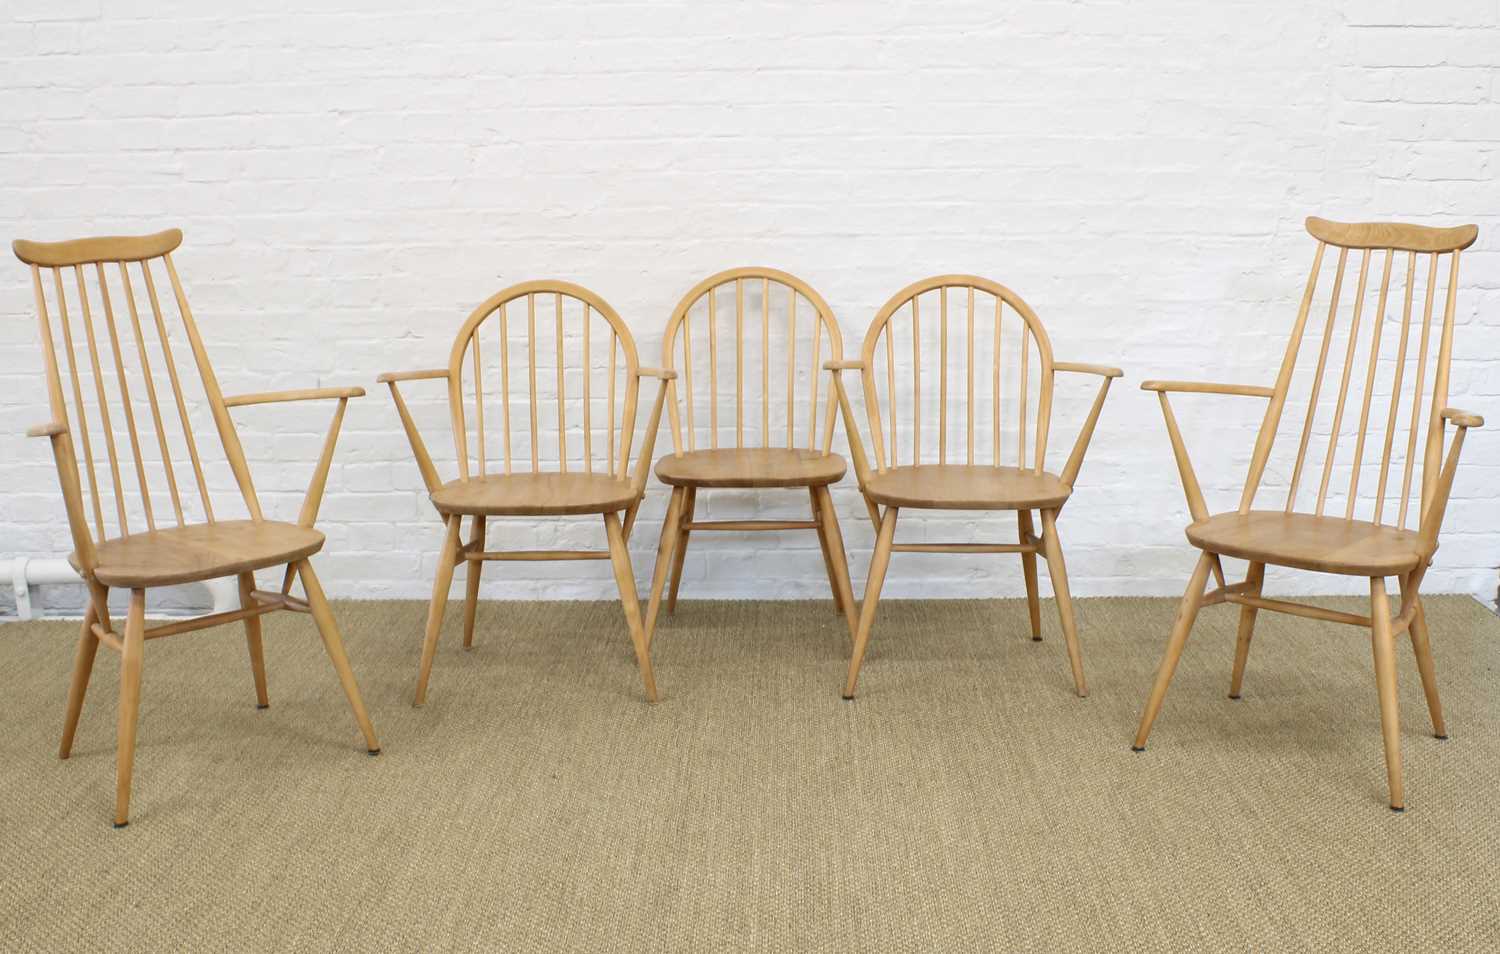 Lucian Ercolani for Ercol Five Dining Chairs